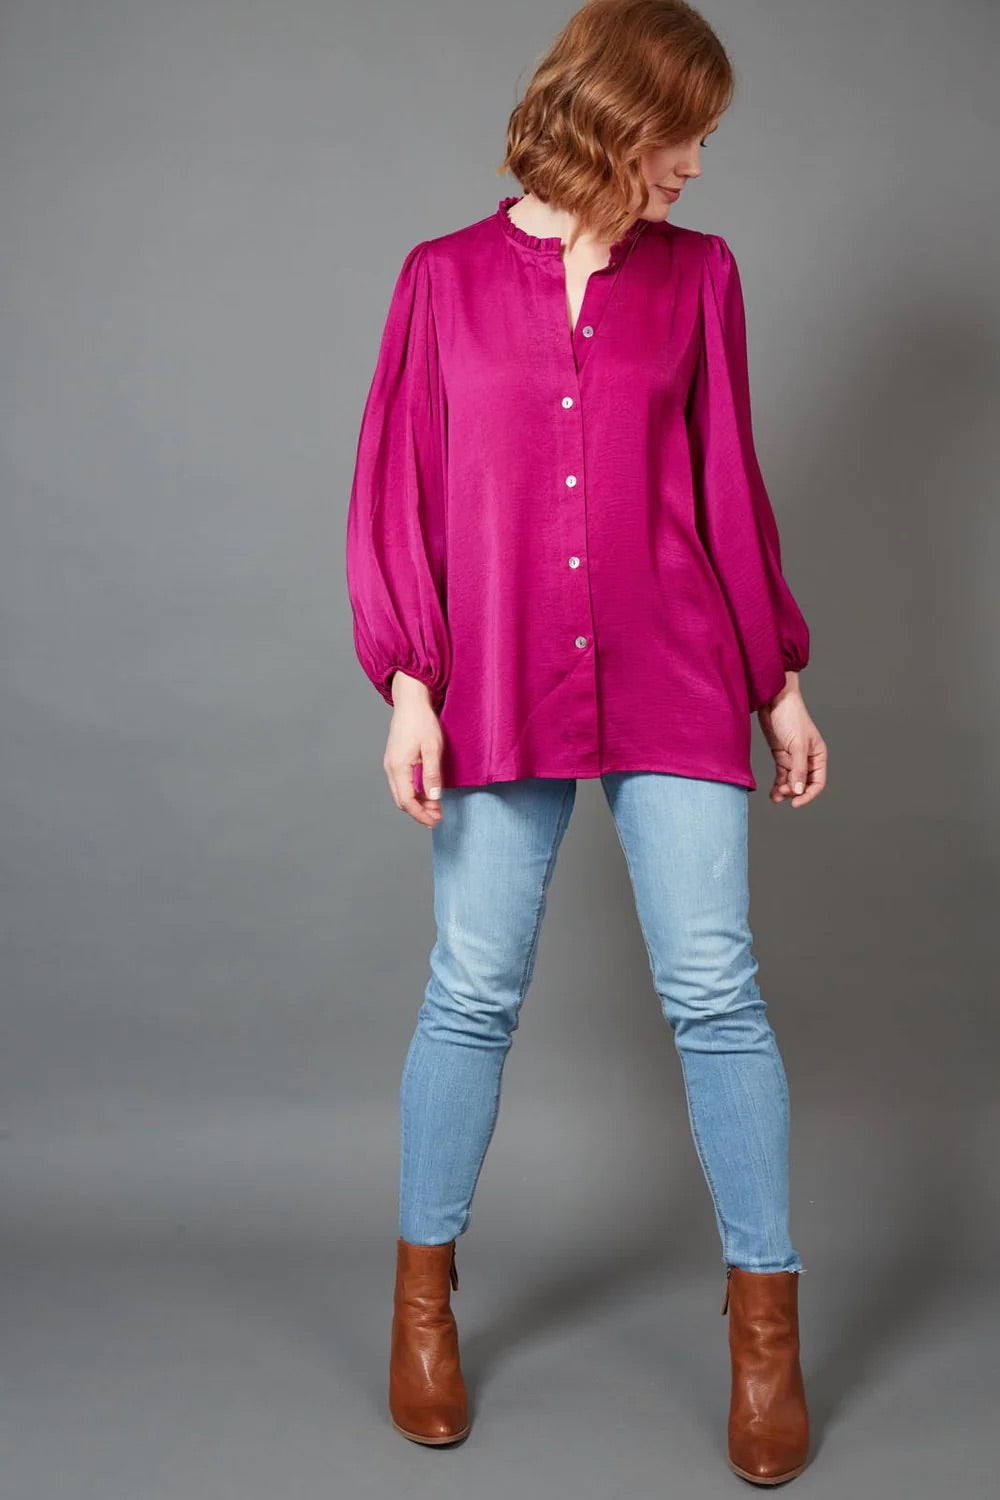 Eb&amp;Ive Winona Blouse in Mulberry Pink